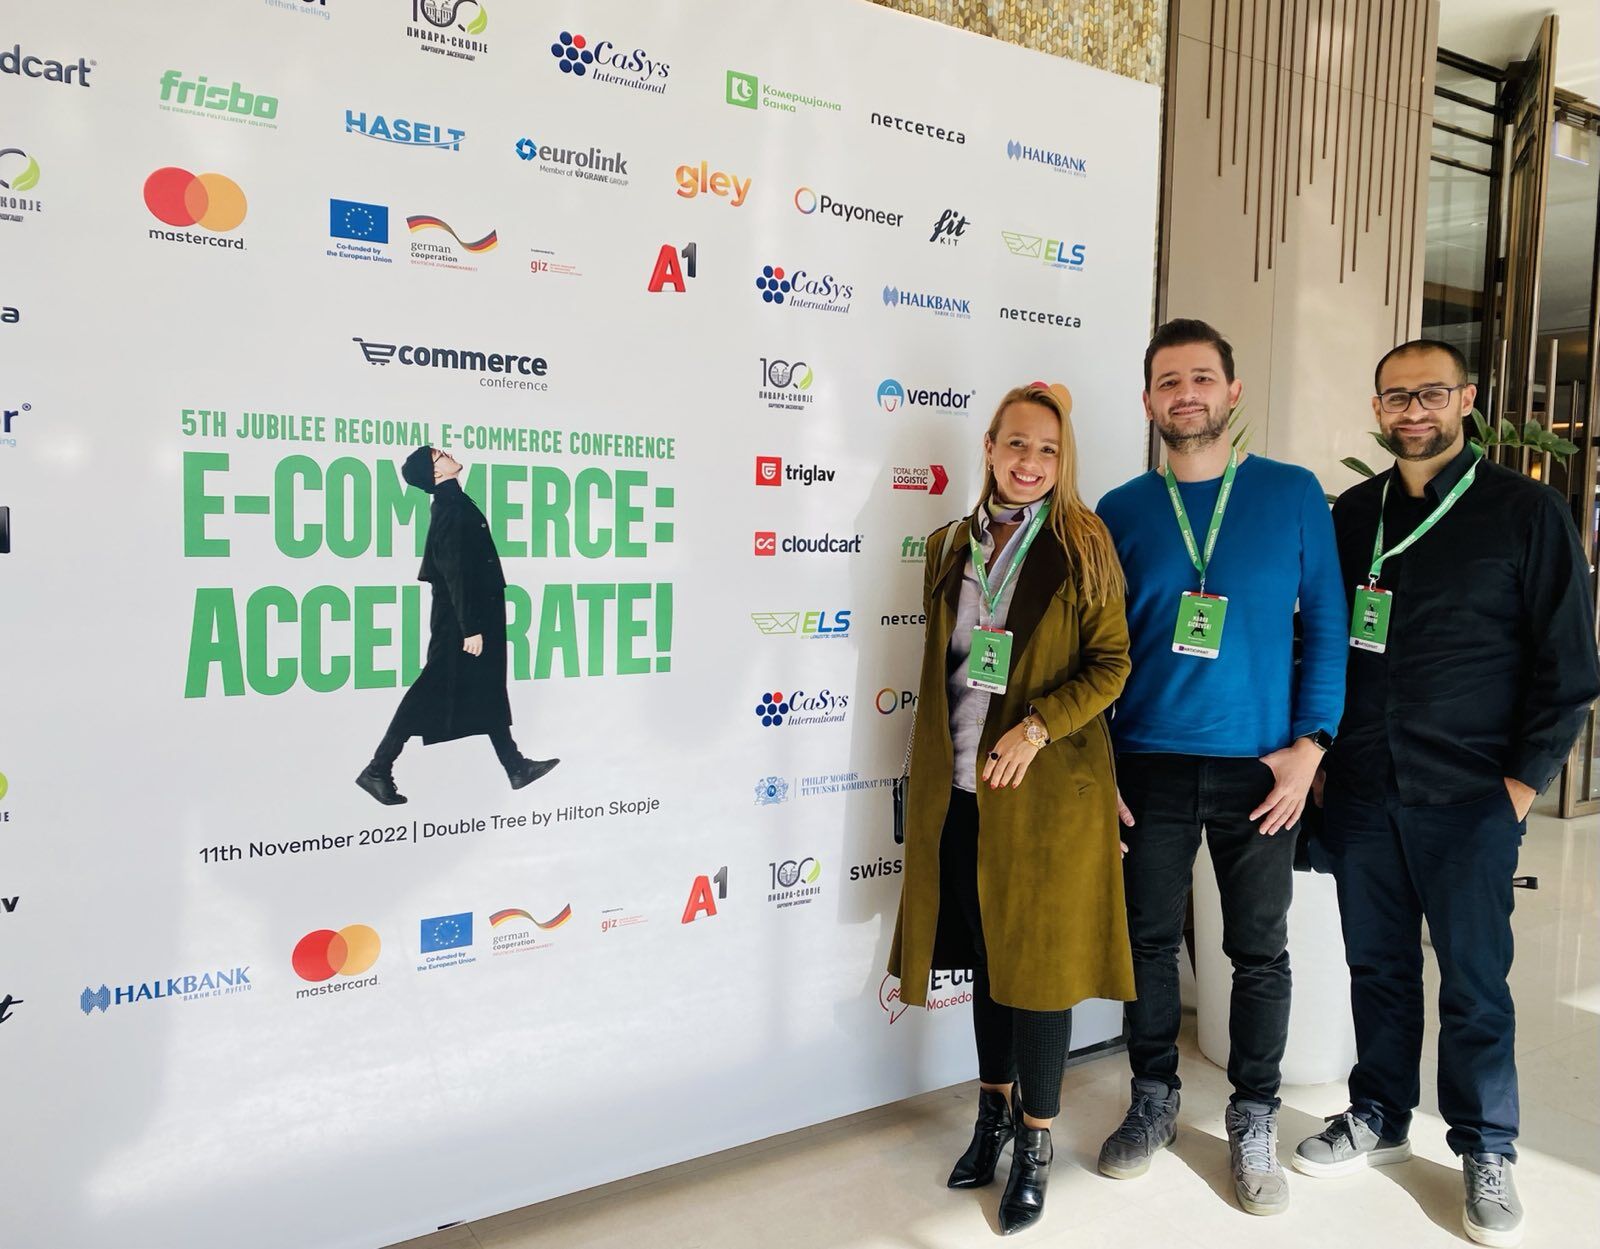 A regional e-commerce conference